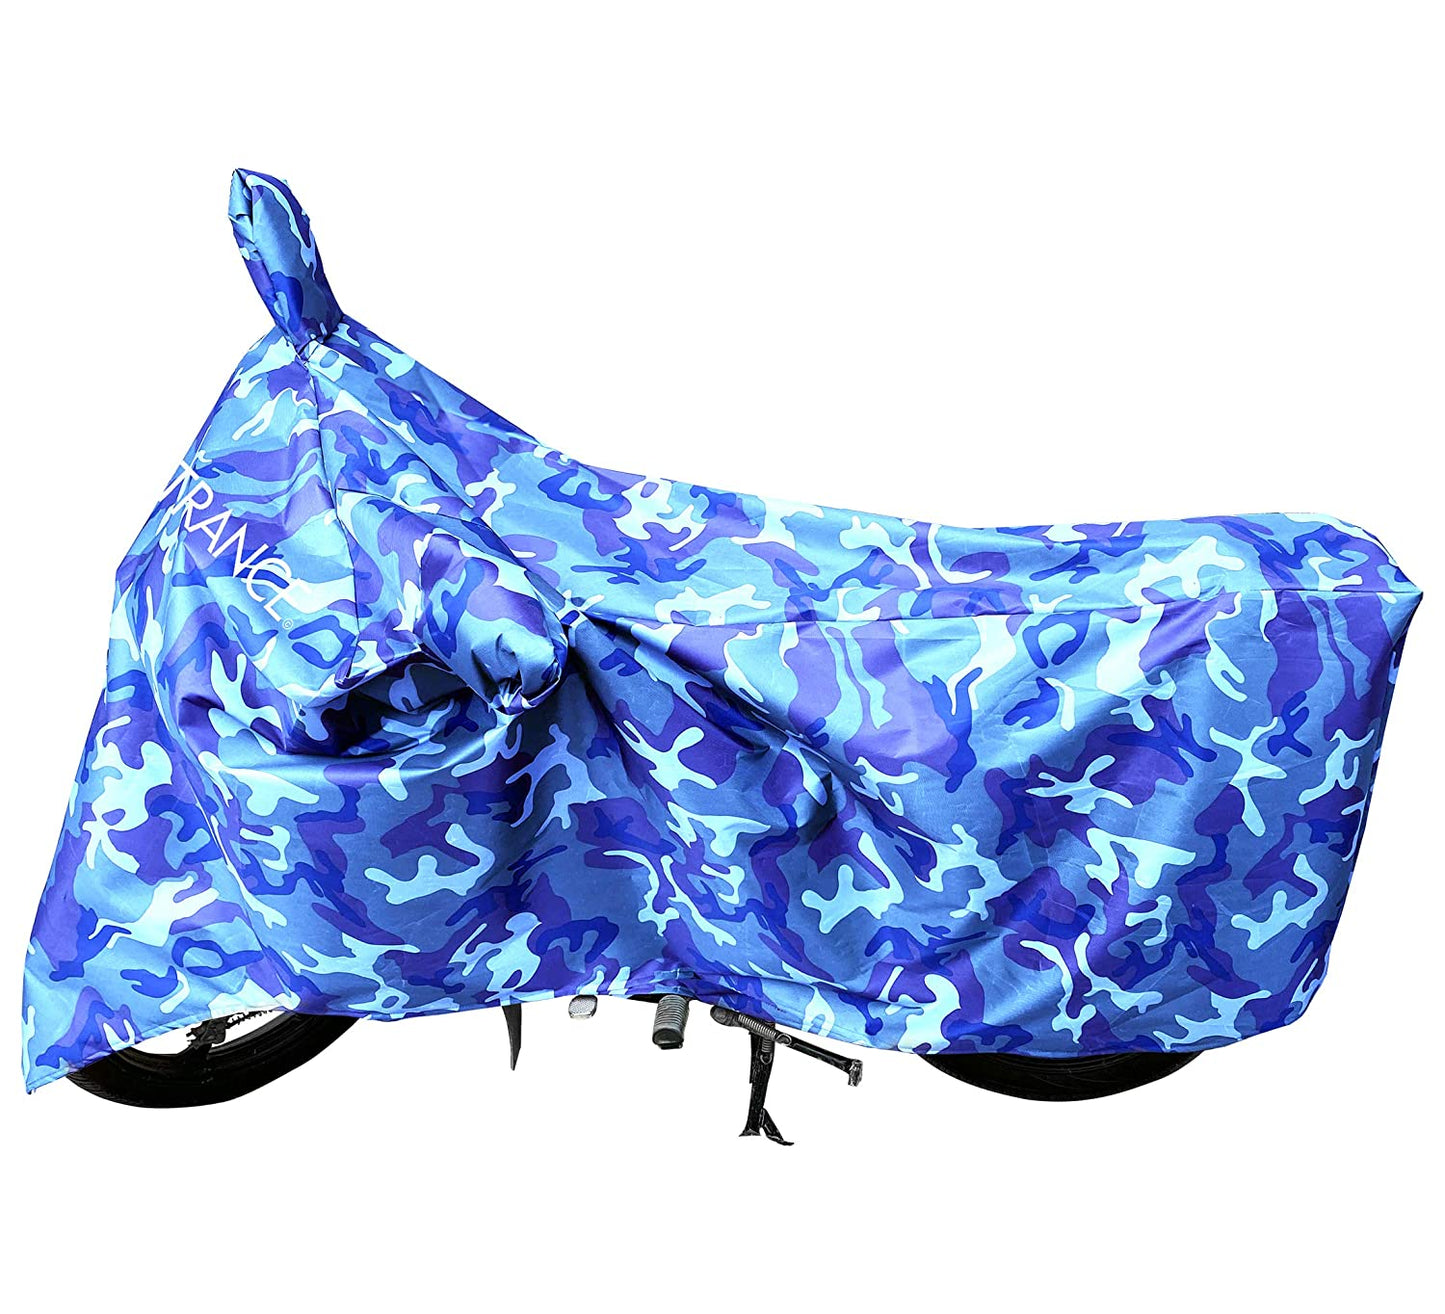 MotoTrance Jungle Bike Body Covers For Honda Activa - Interlock-Stitched Waterproof and Heat Resistant with Mirror Pockets